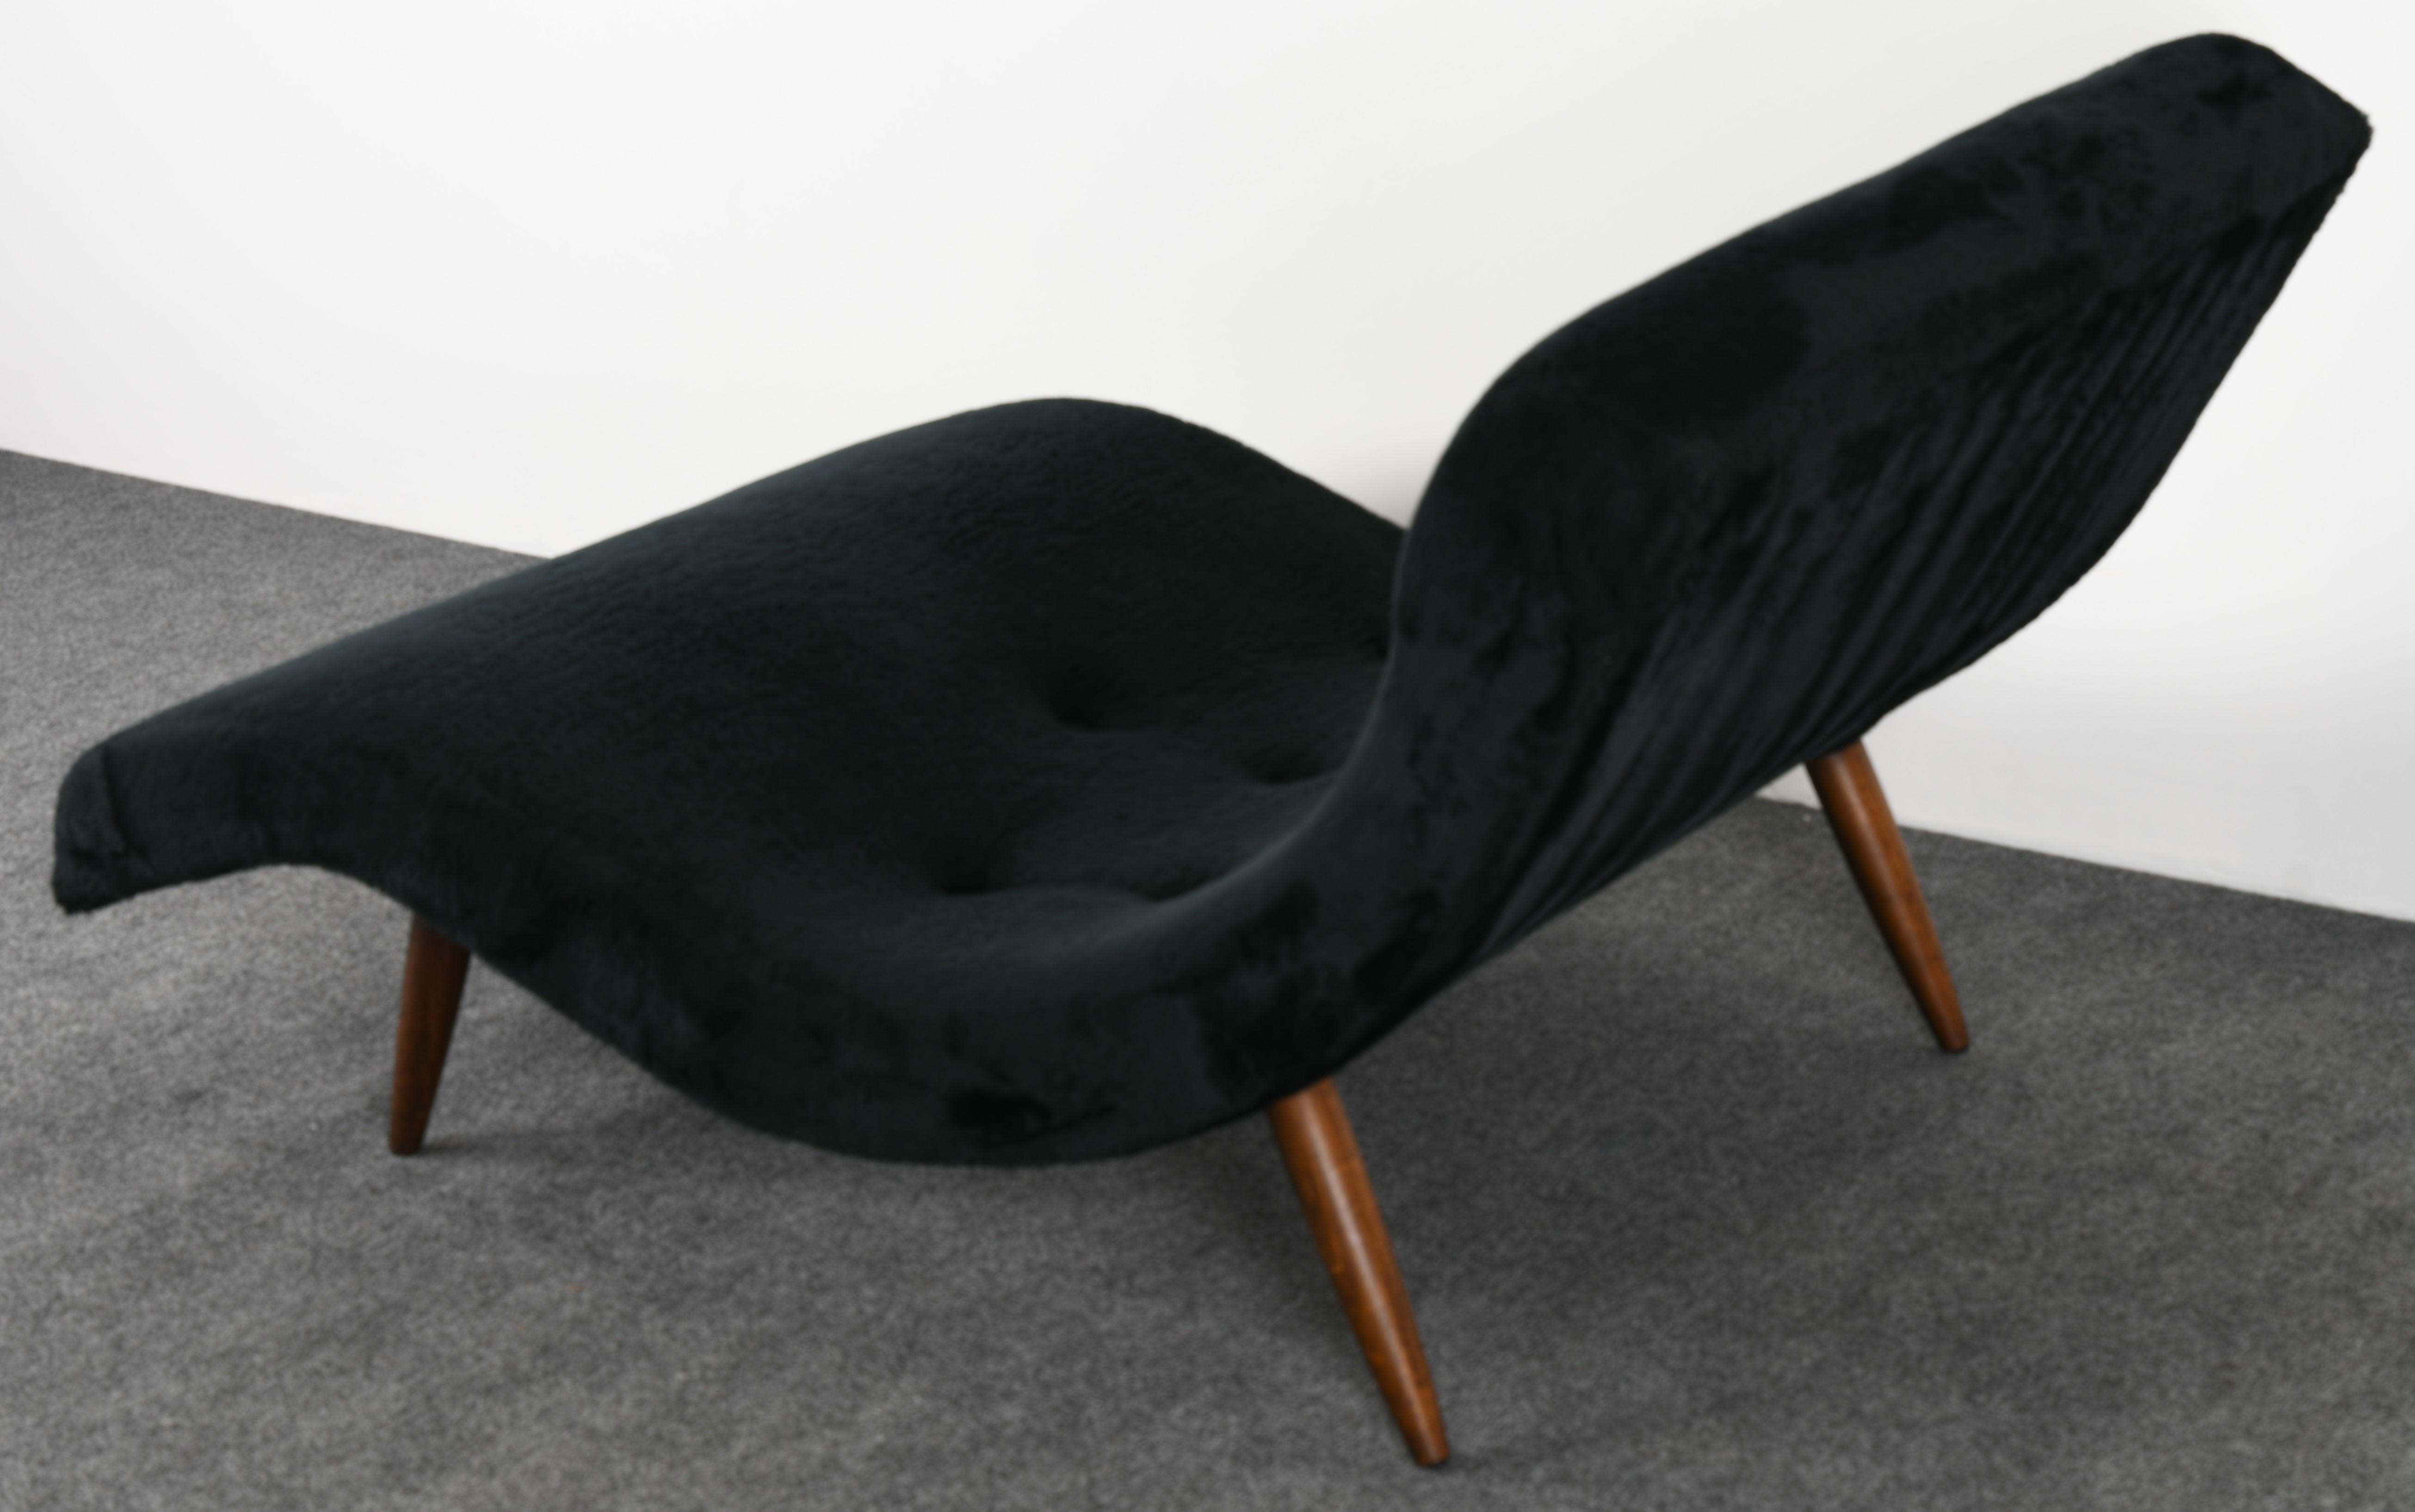 Faux Fur Adrian Pearsall Wave Chaise for Craft Associates Inc., 1960s